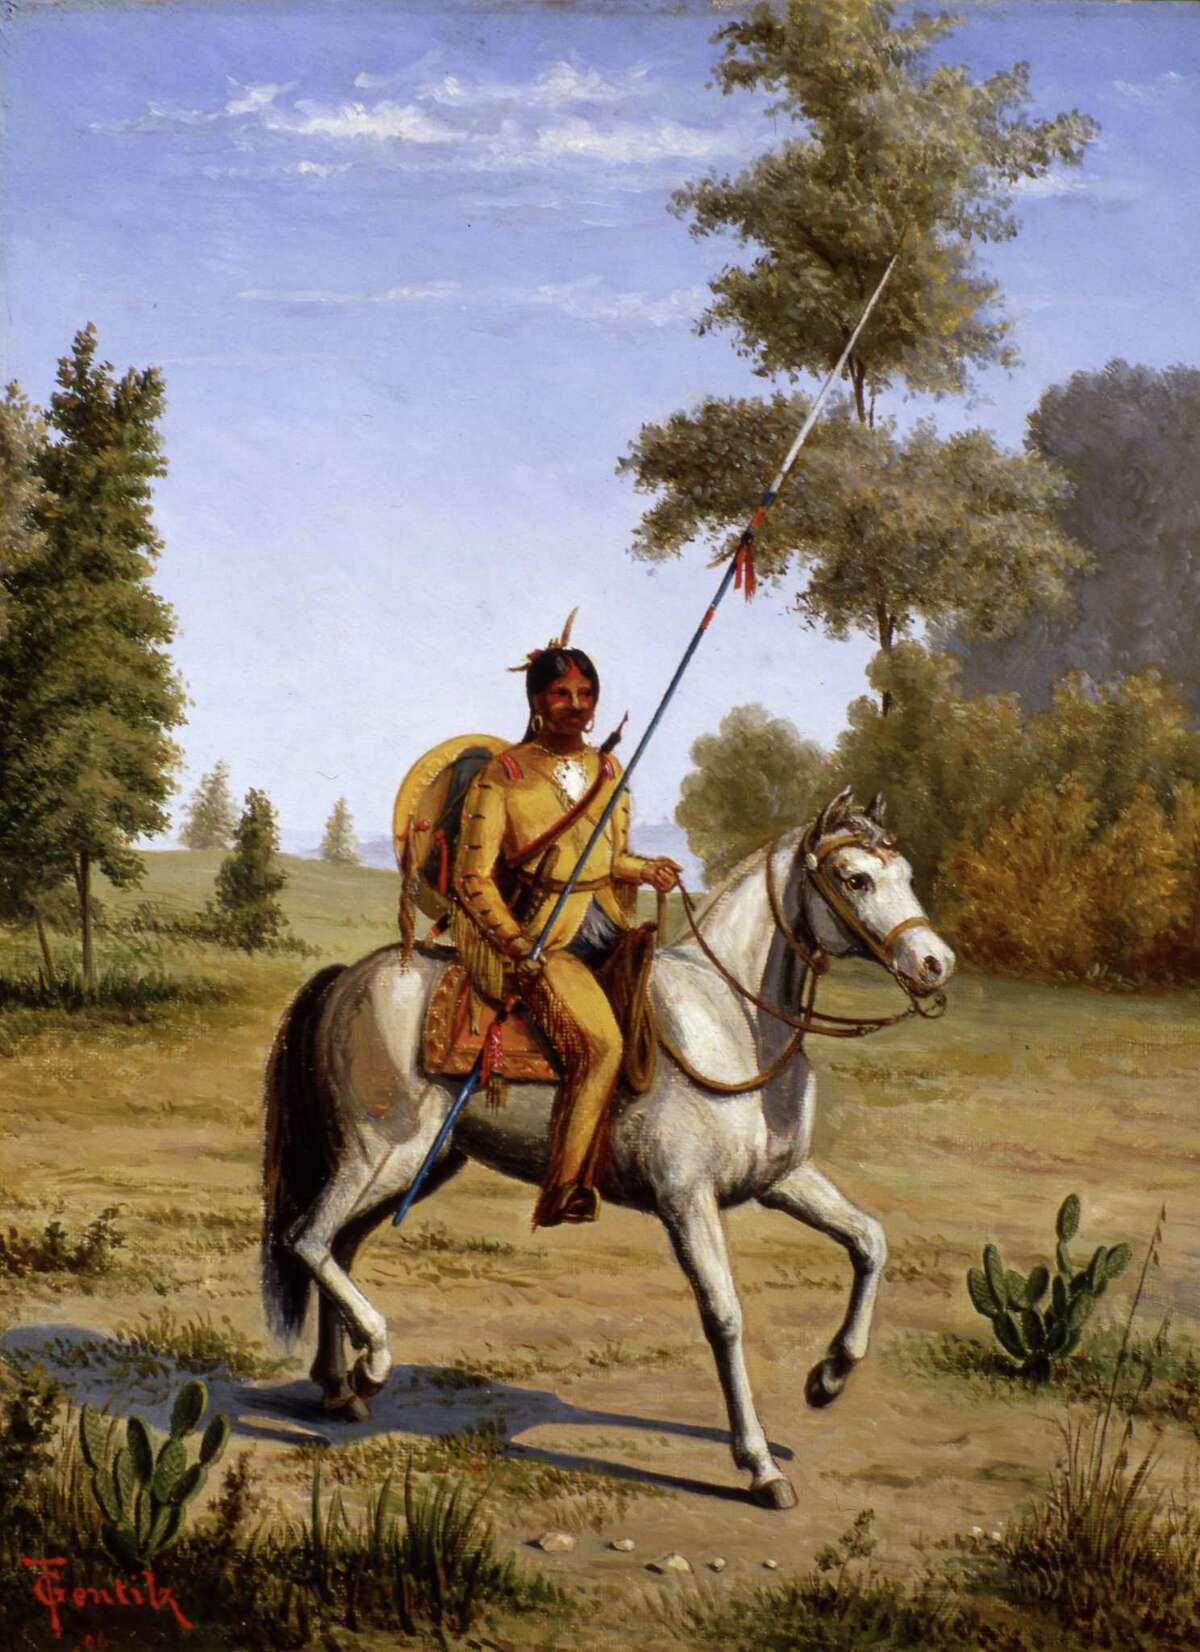 Painting of Comanche Chief by Theodore Gentilz, ca. 1890s